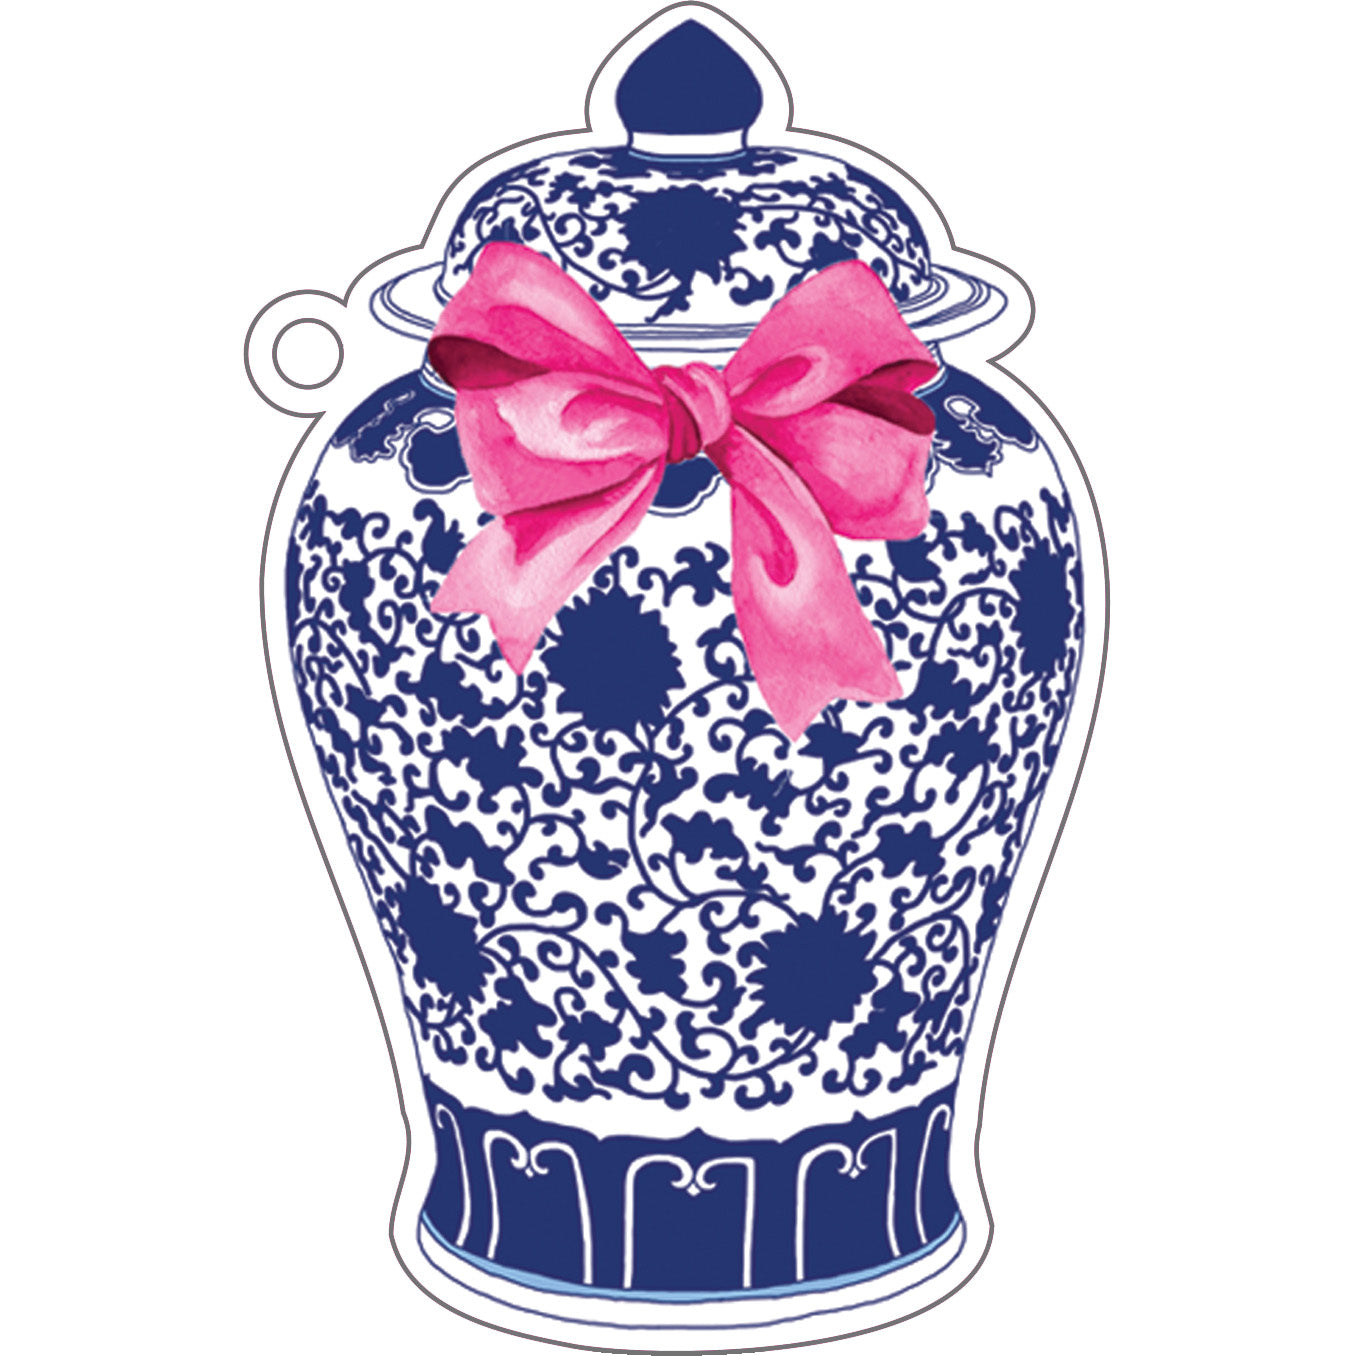 SALE!! Stock Shoppe: Ginger Jar with Pink Bow Die-Cut Gift Tags